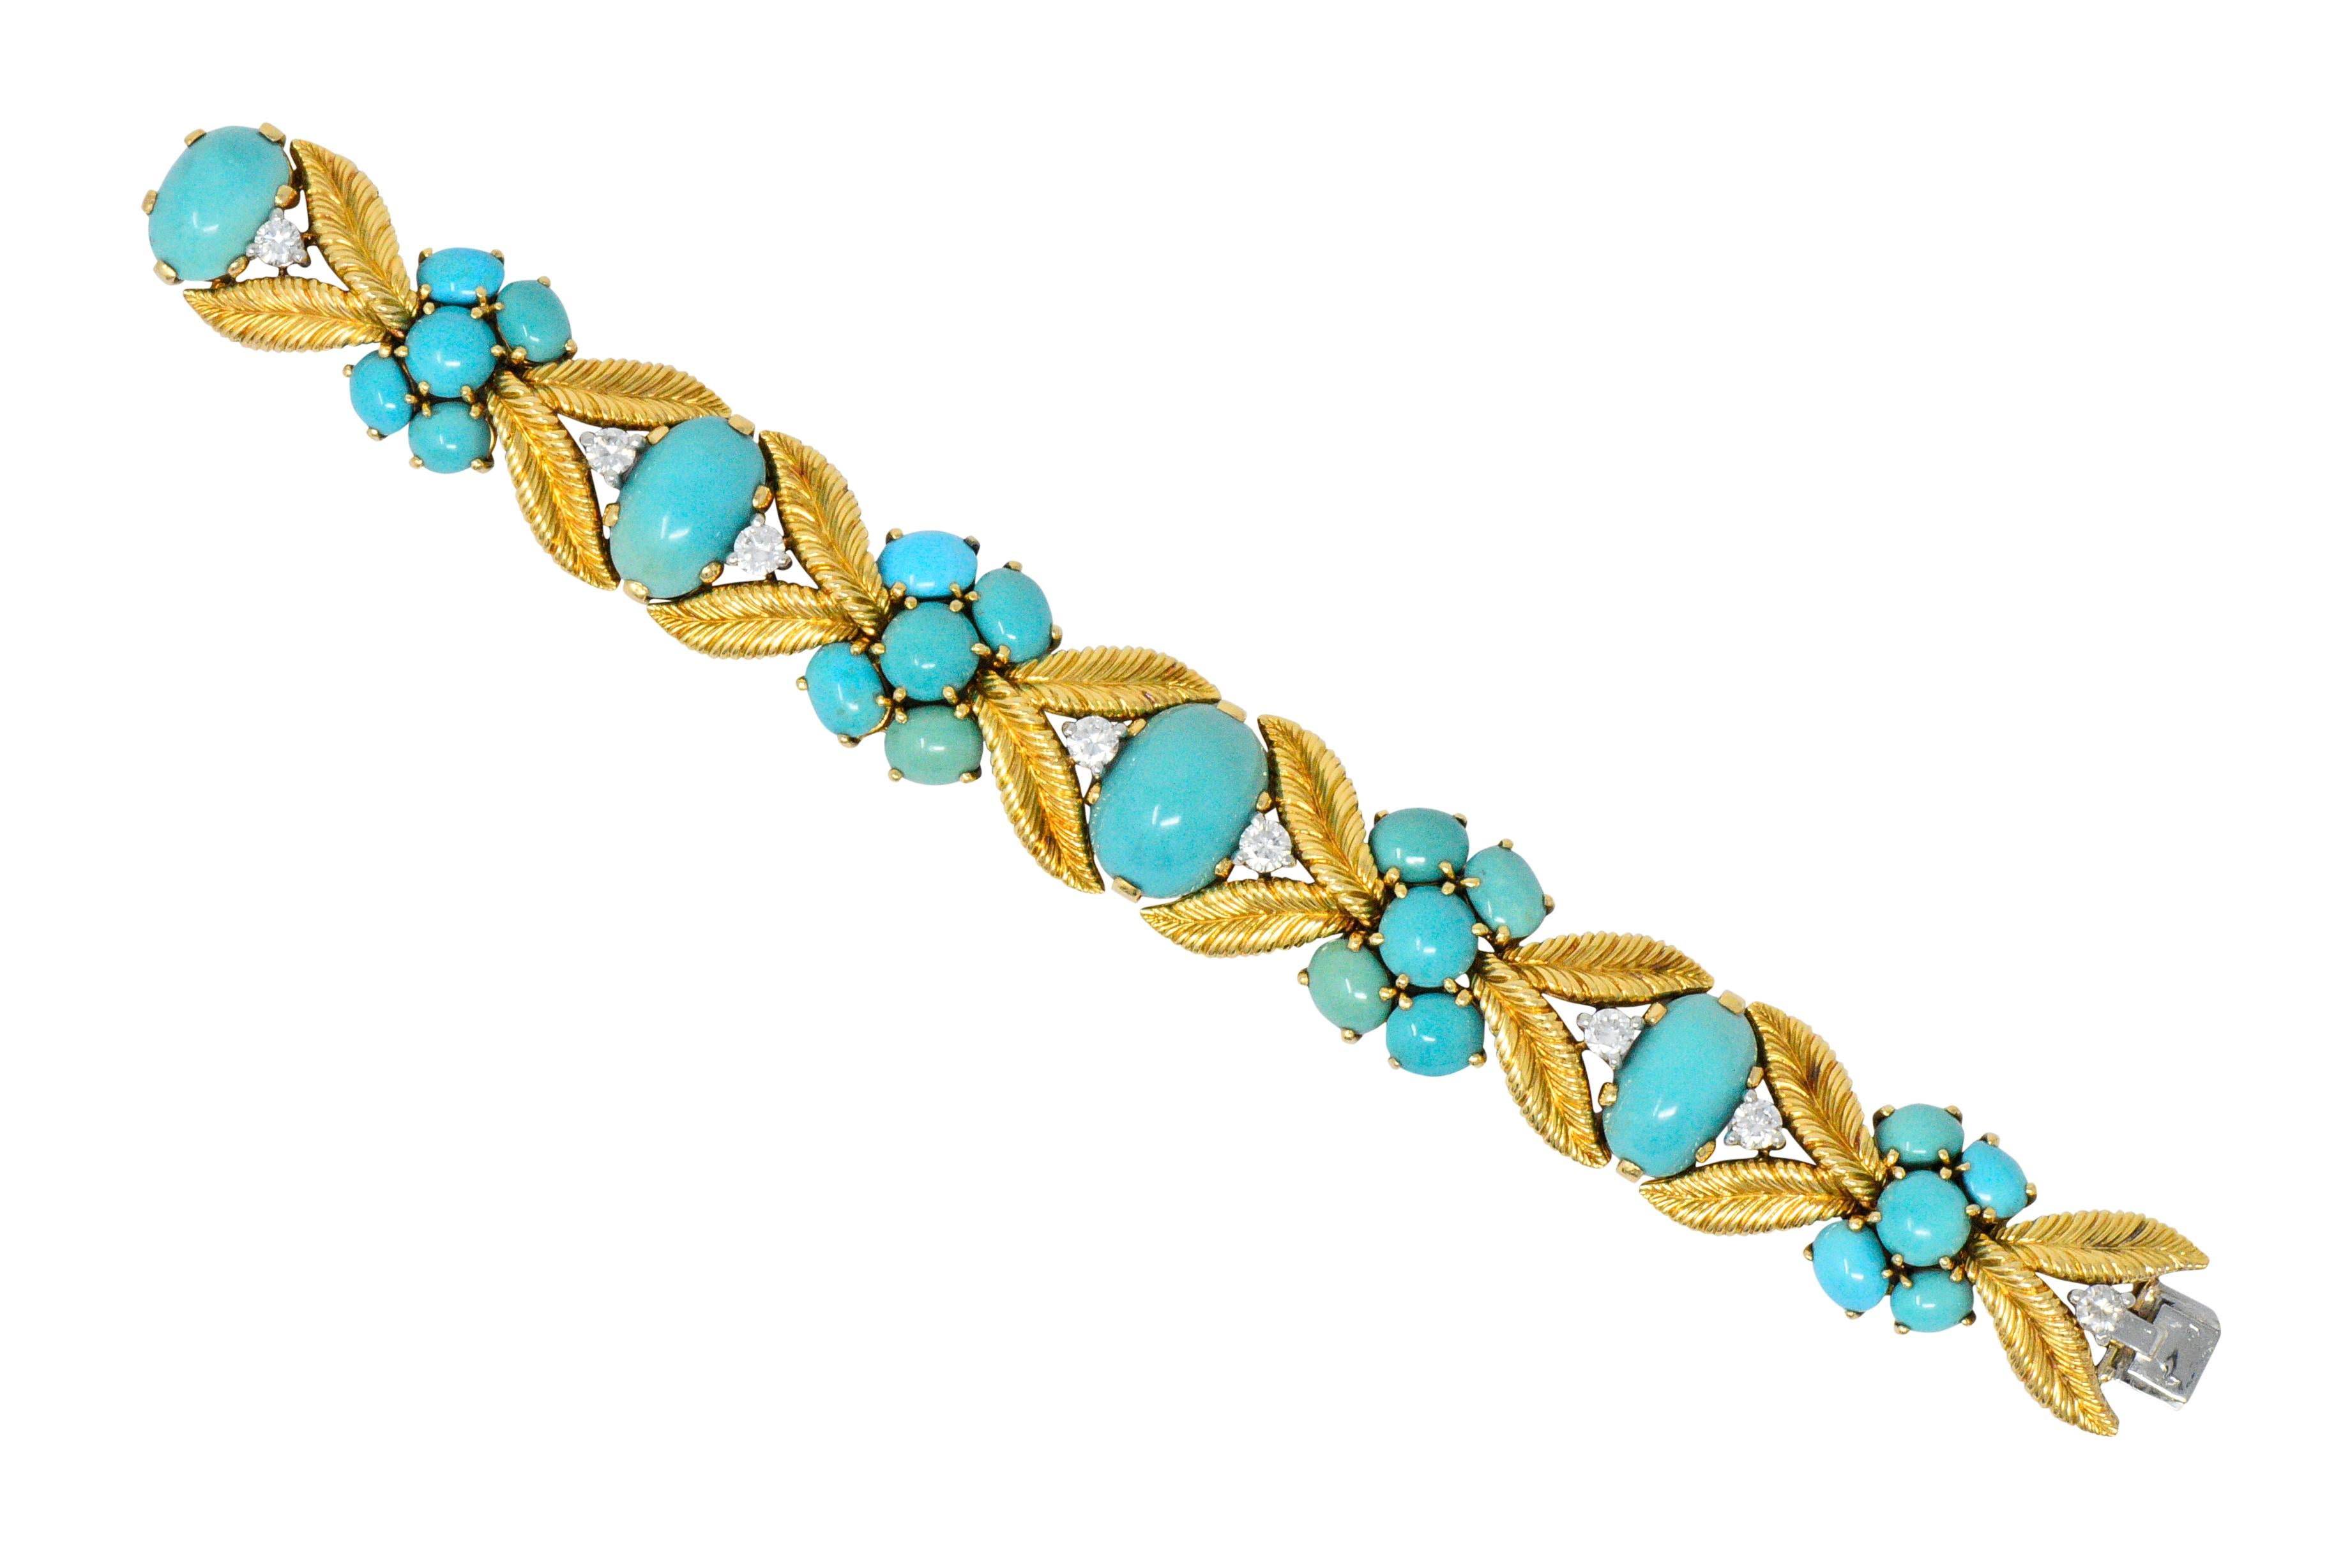 Set with oval and round cabochon turquoise of varying hues, the largest turquoise measuring approximately 16.2 x 12.8 mm

Accented by 8 round brilliant cut diamonds weighing approximately 2.00 carats total, F/G color and VS clarity

With rich